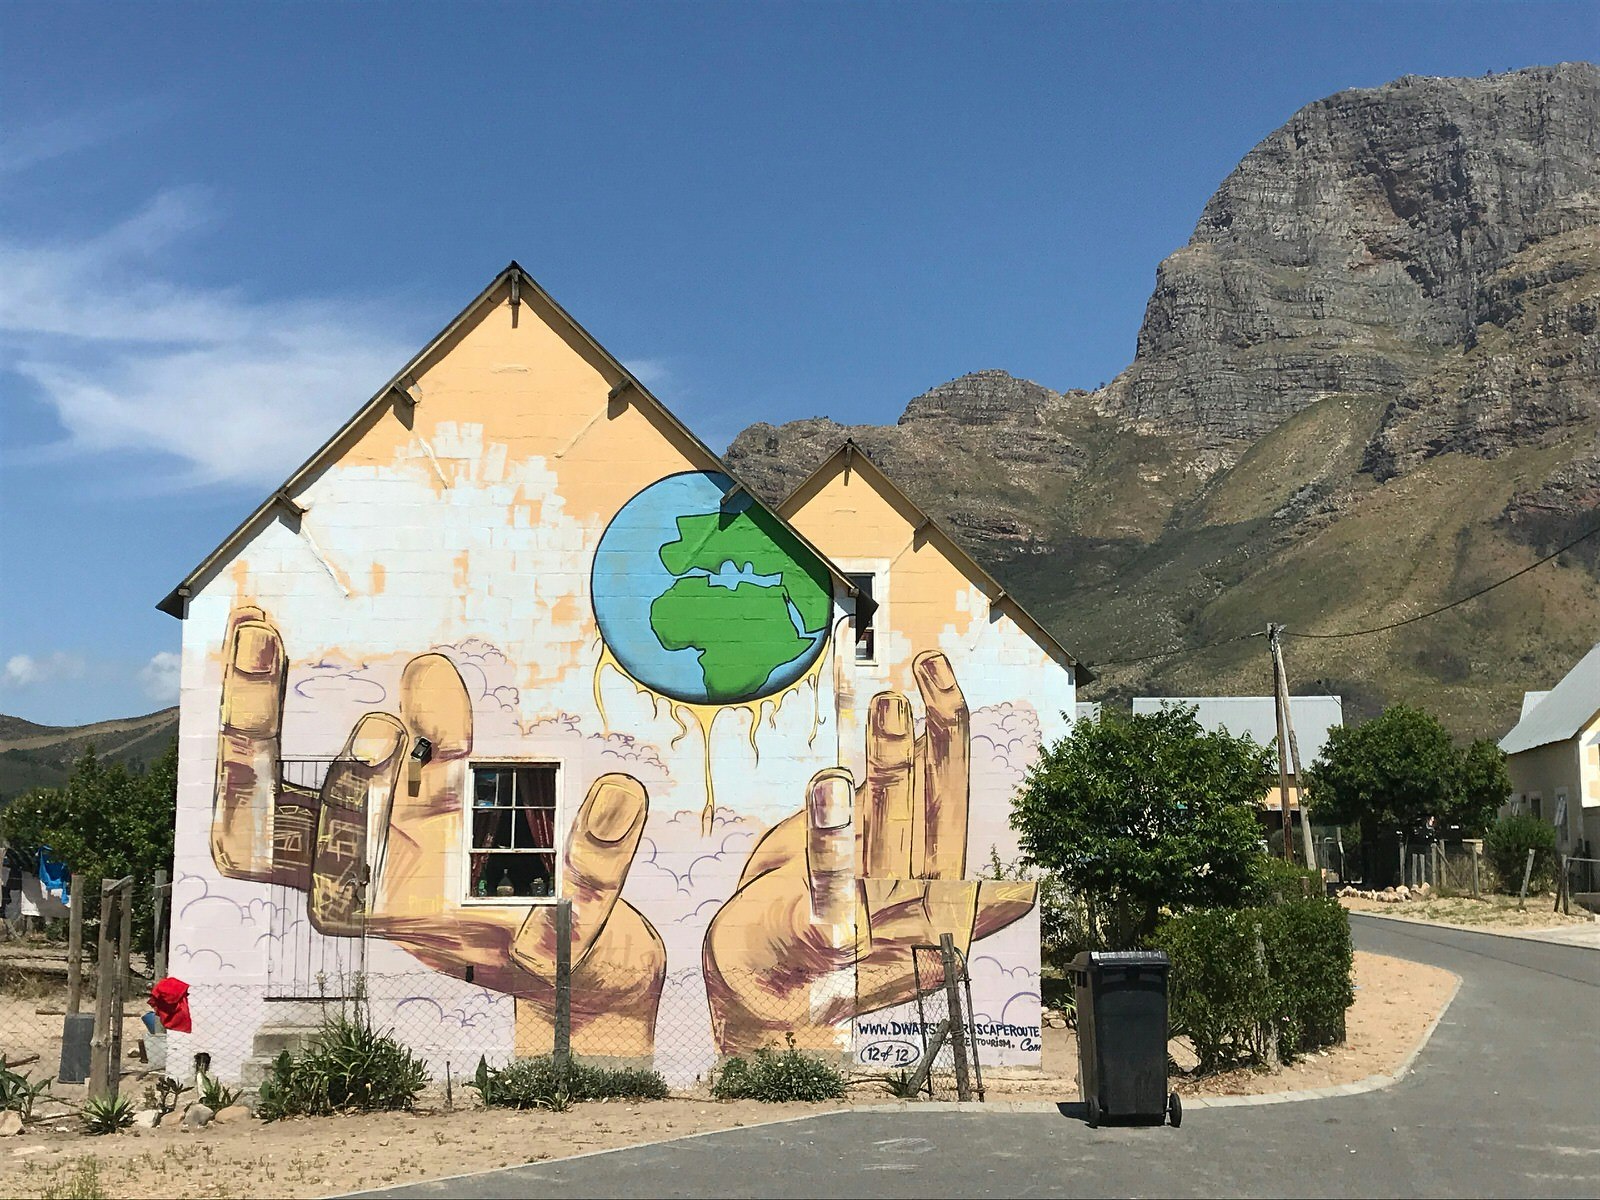 A giant mural of a pair of hands spread across the split facade of a family home, with the rugged majesty of the Drakenstein Mountains in background © Simon Richmond / Lonely Planet